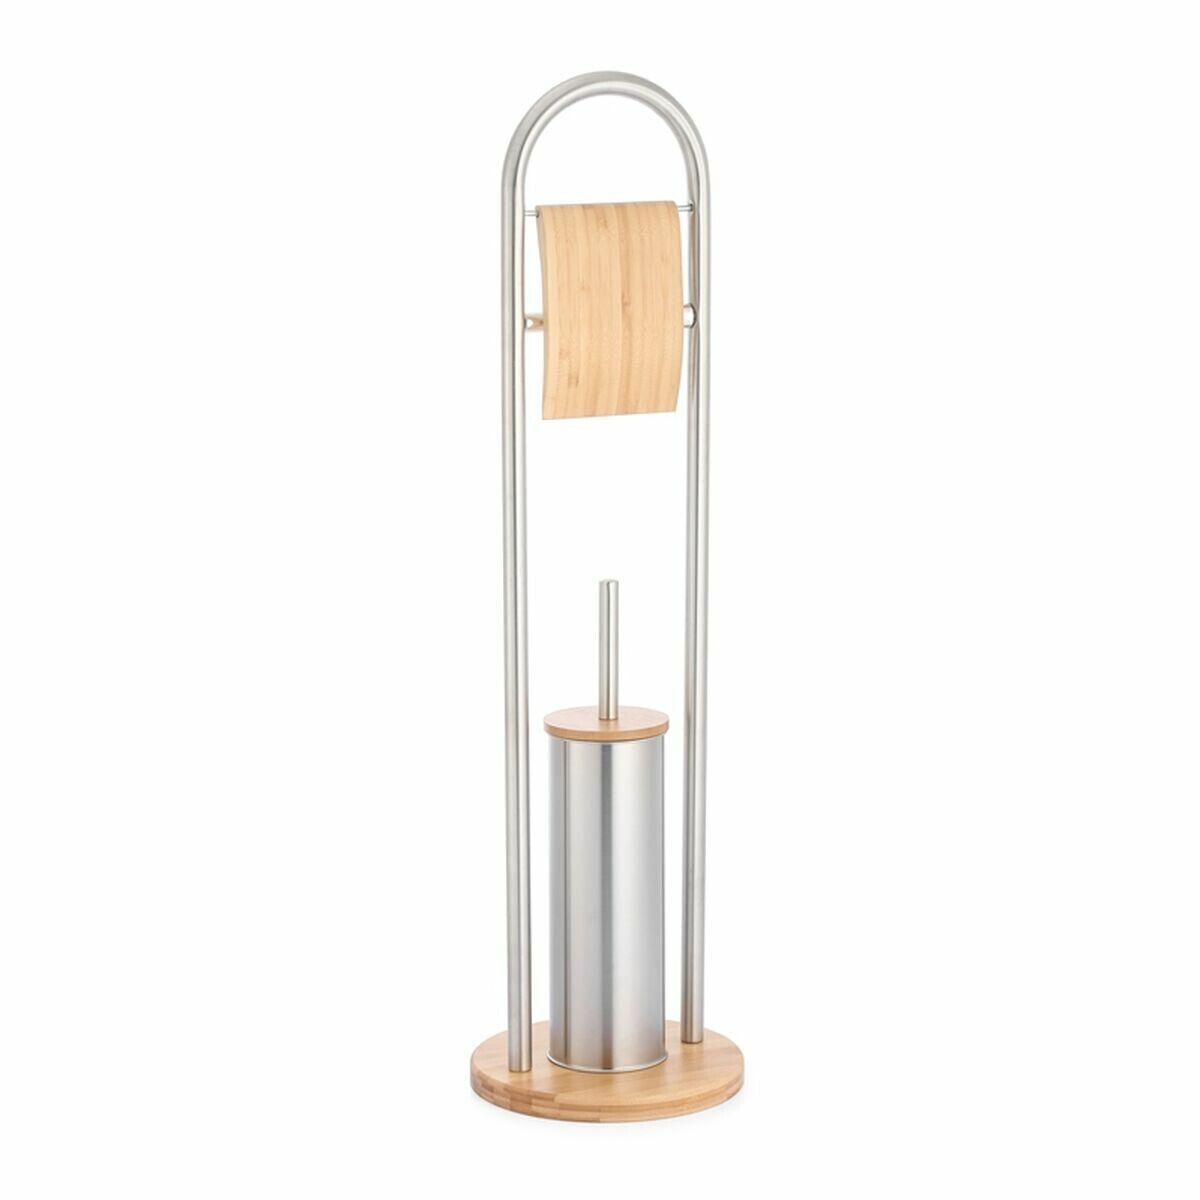 Toilet Paper Holder with Brush Stand DKD Home Decor Silver Natural Bamboo Stainless steel 22 x 22 x 80 cm